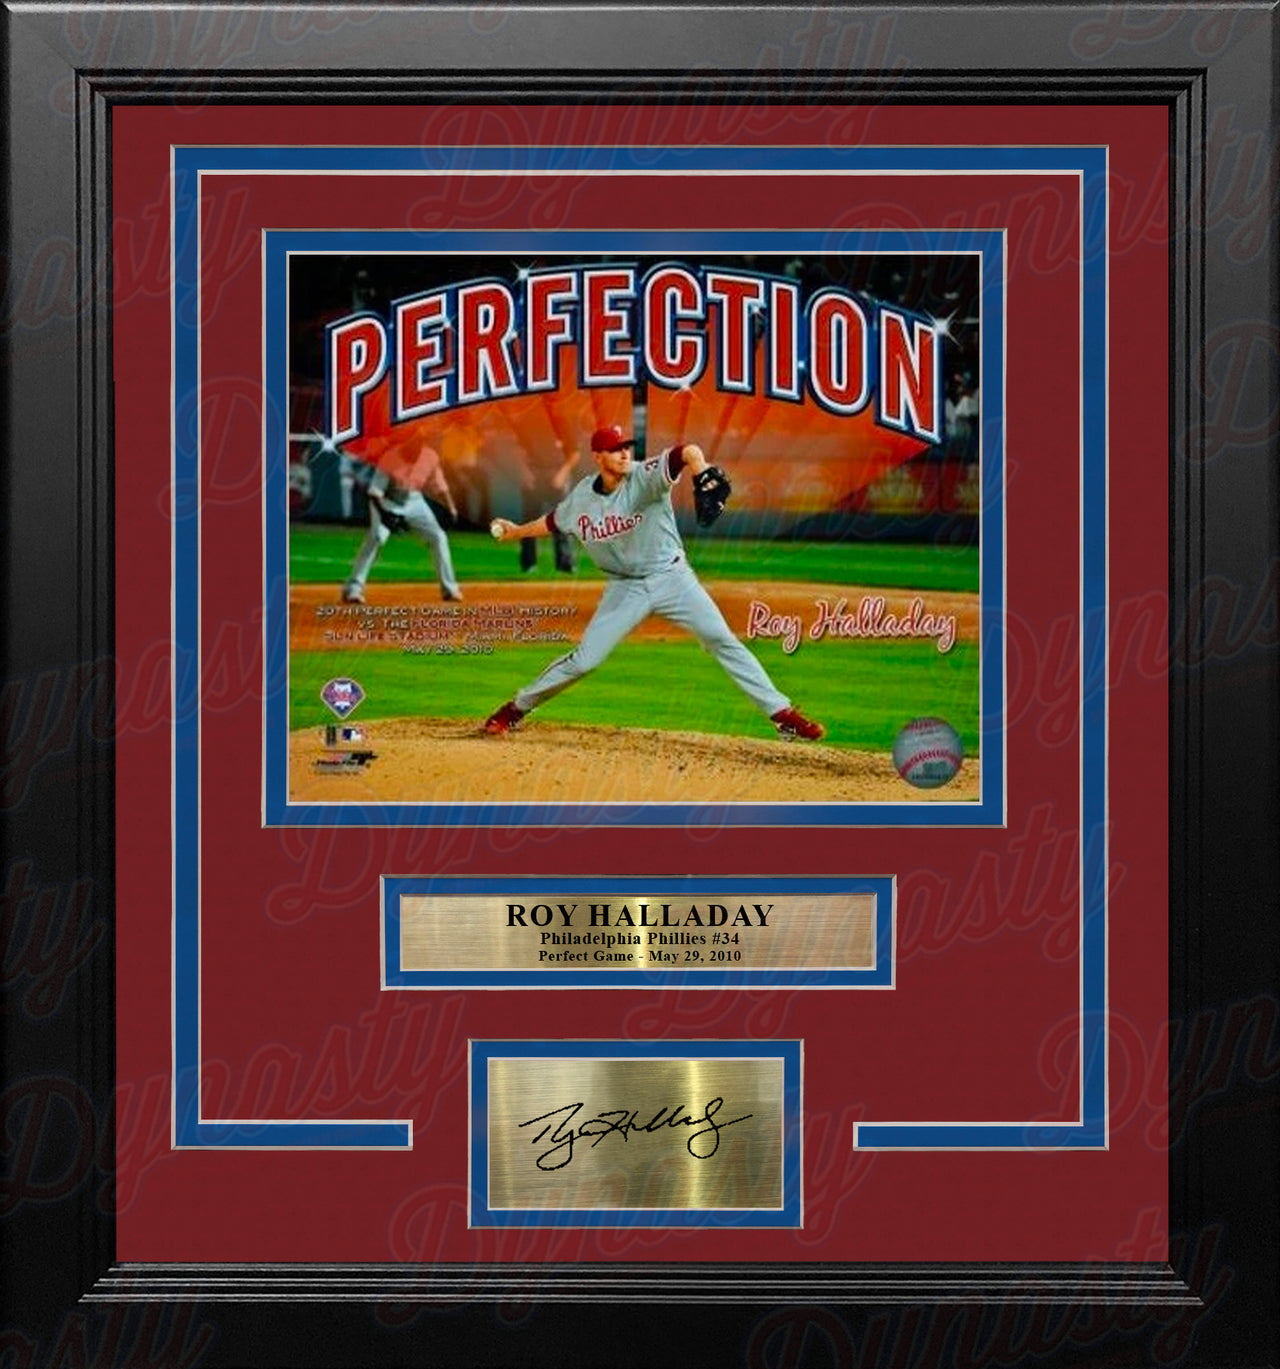 Roy Halladay Perfection Philadelphia Phillies 8" x 10" Framed Baseball Photo with Engraved Autograph - Dynasty Sports & Framing 